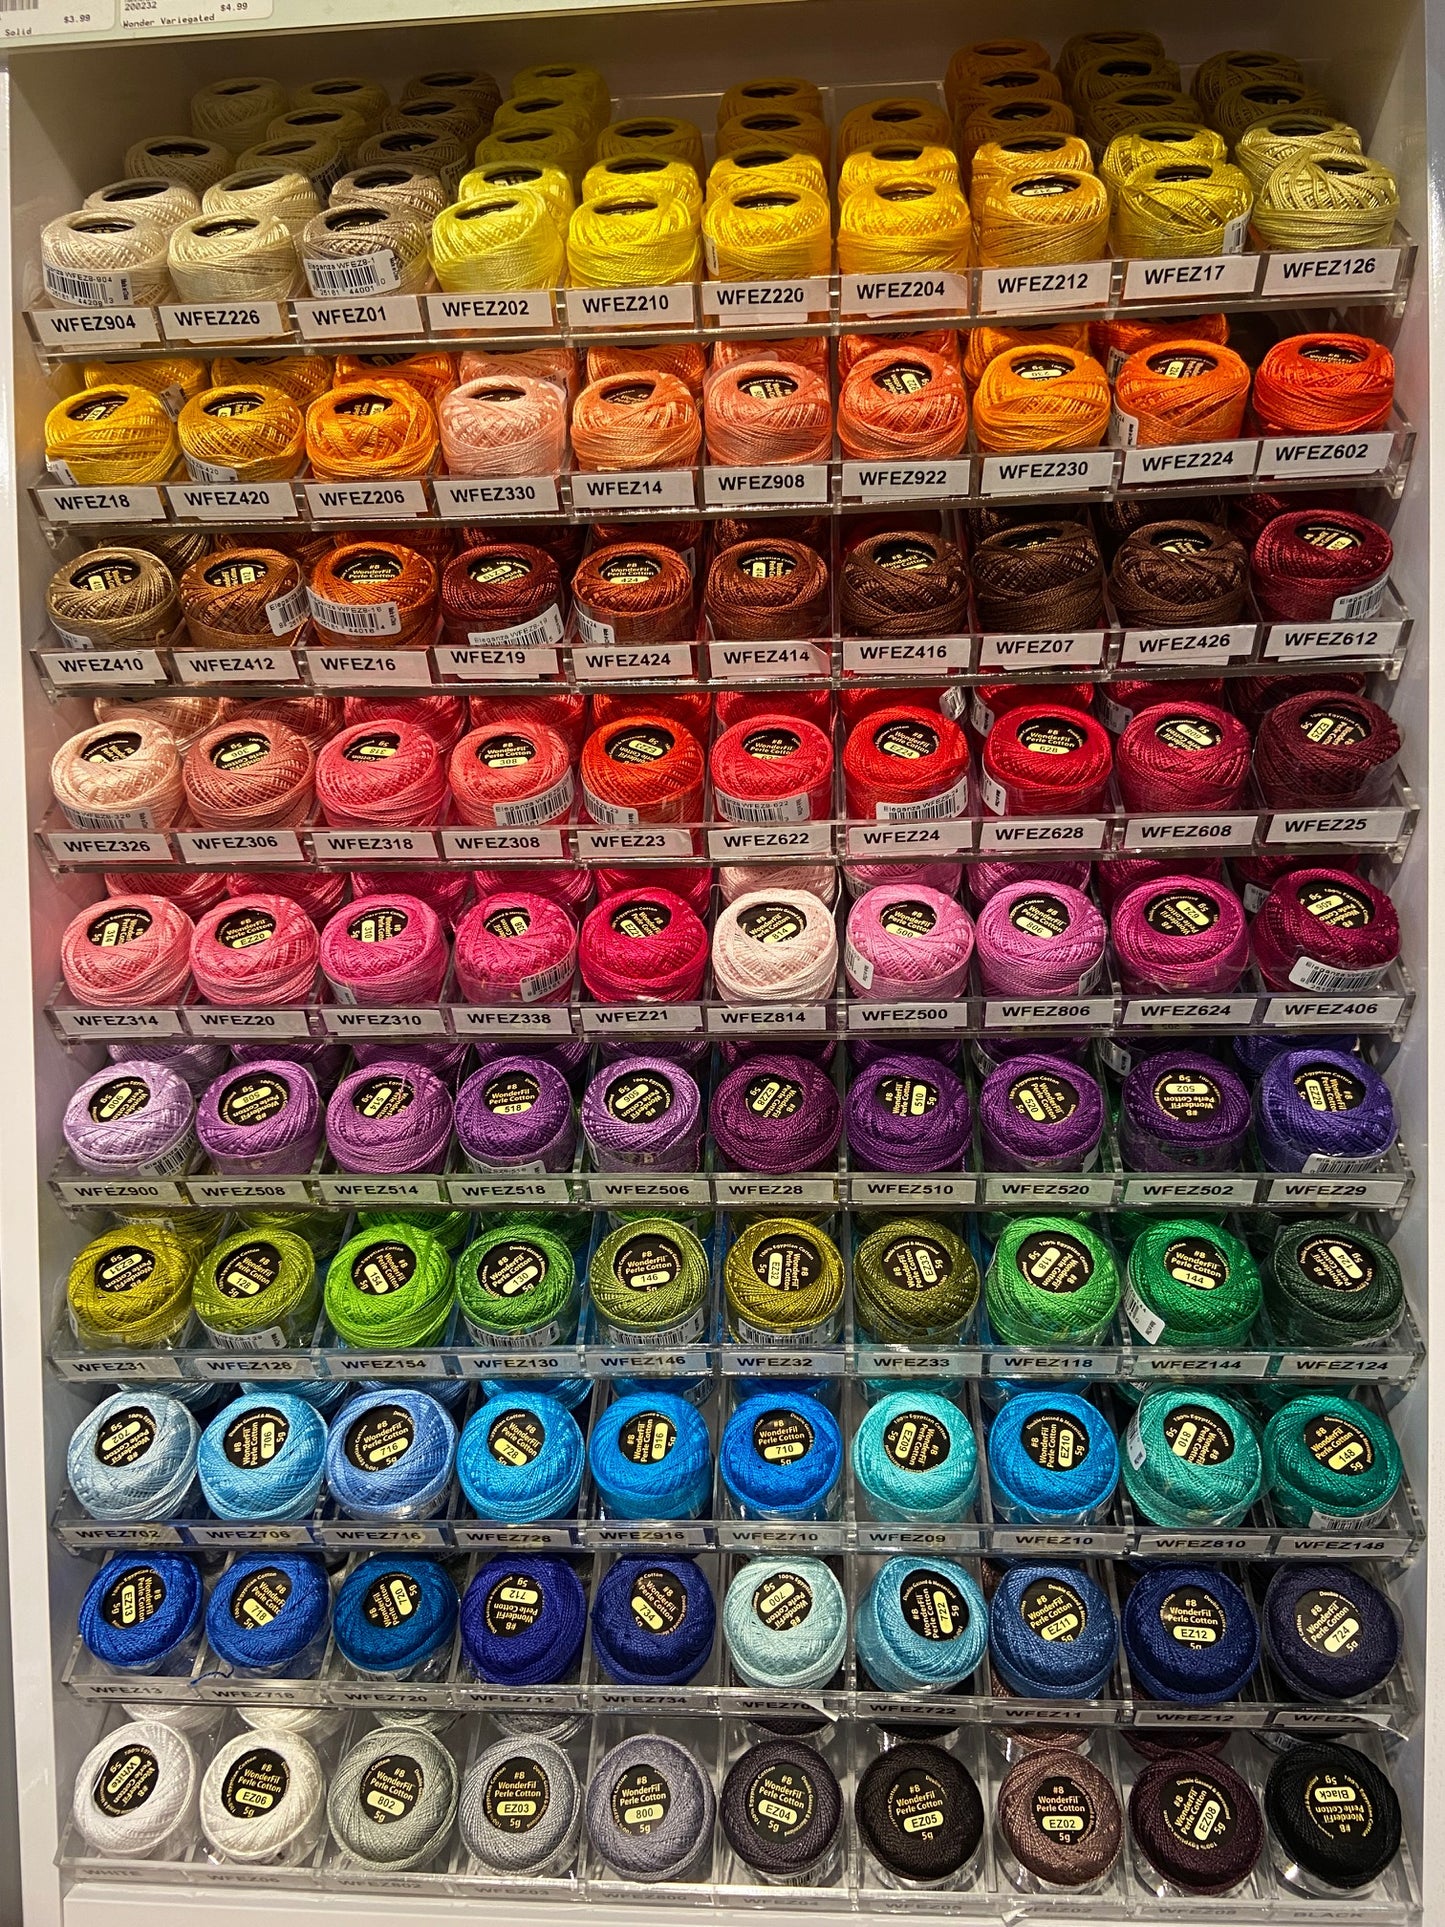 Embroidery Thread 10 Pack